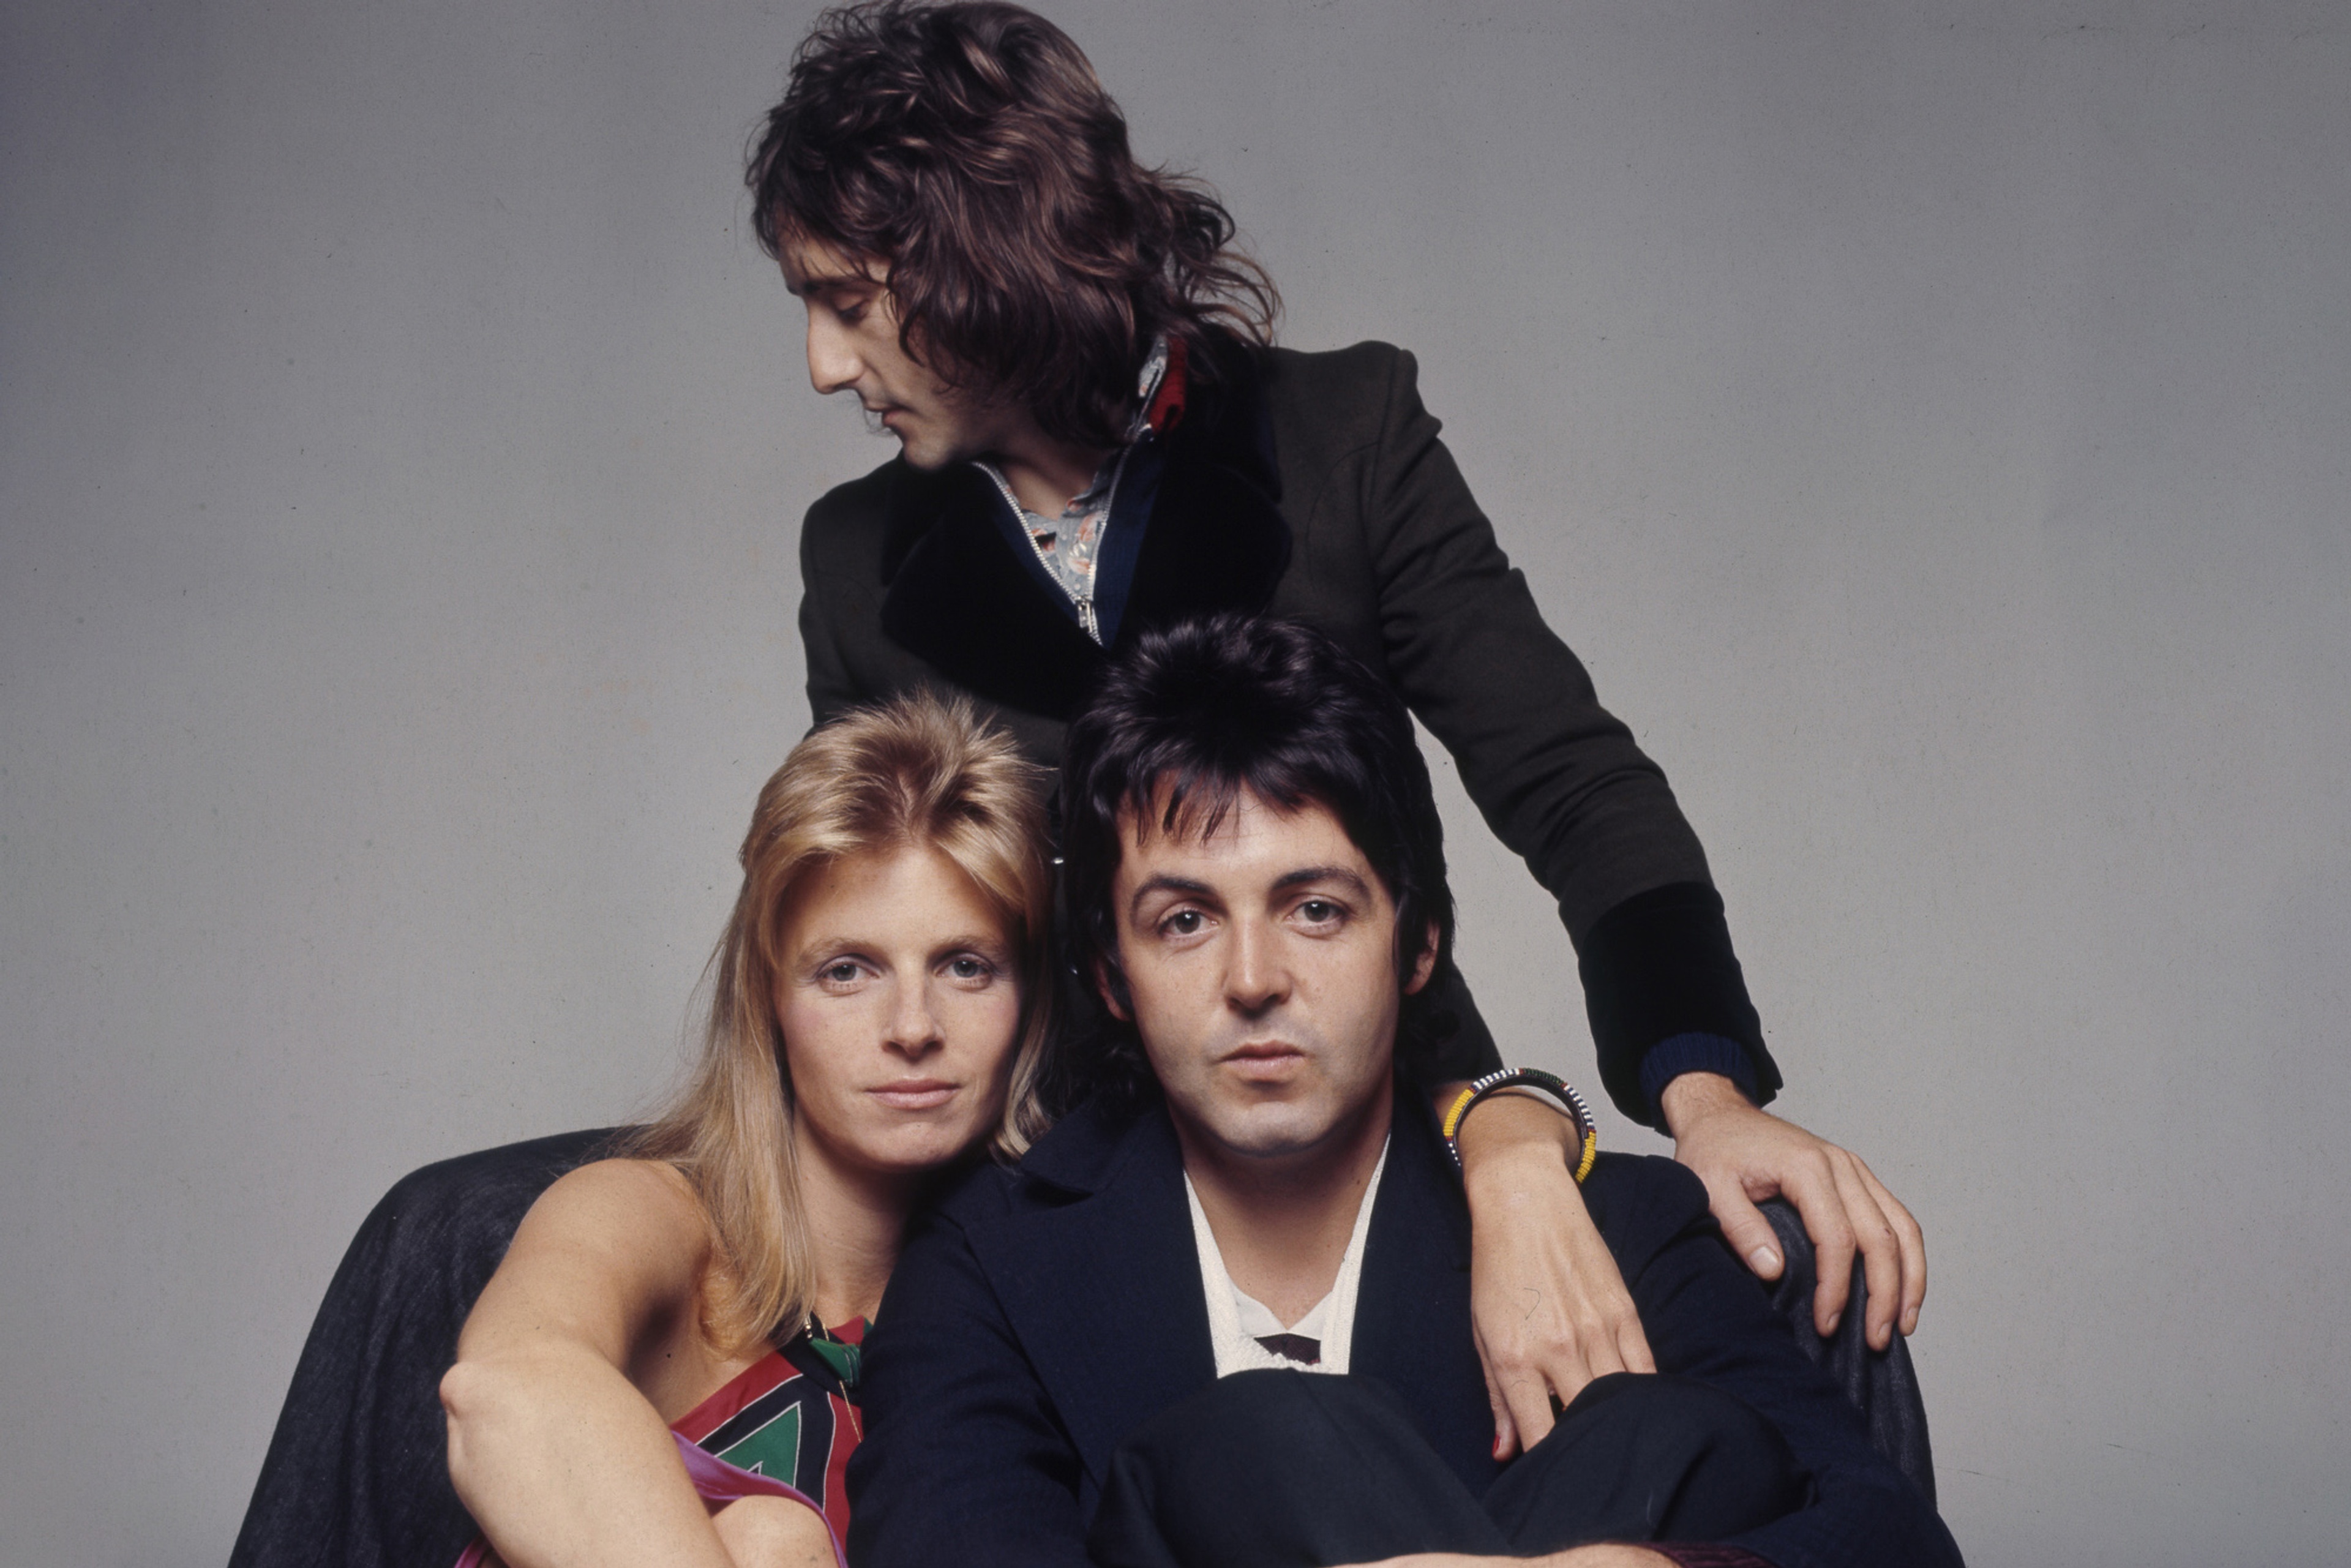 Denny Laine, Paul and Linda McCartney sitting in front of a grey background